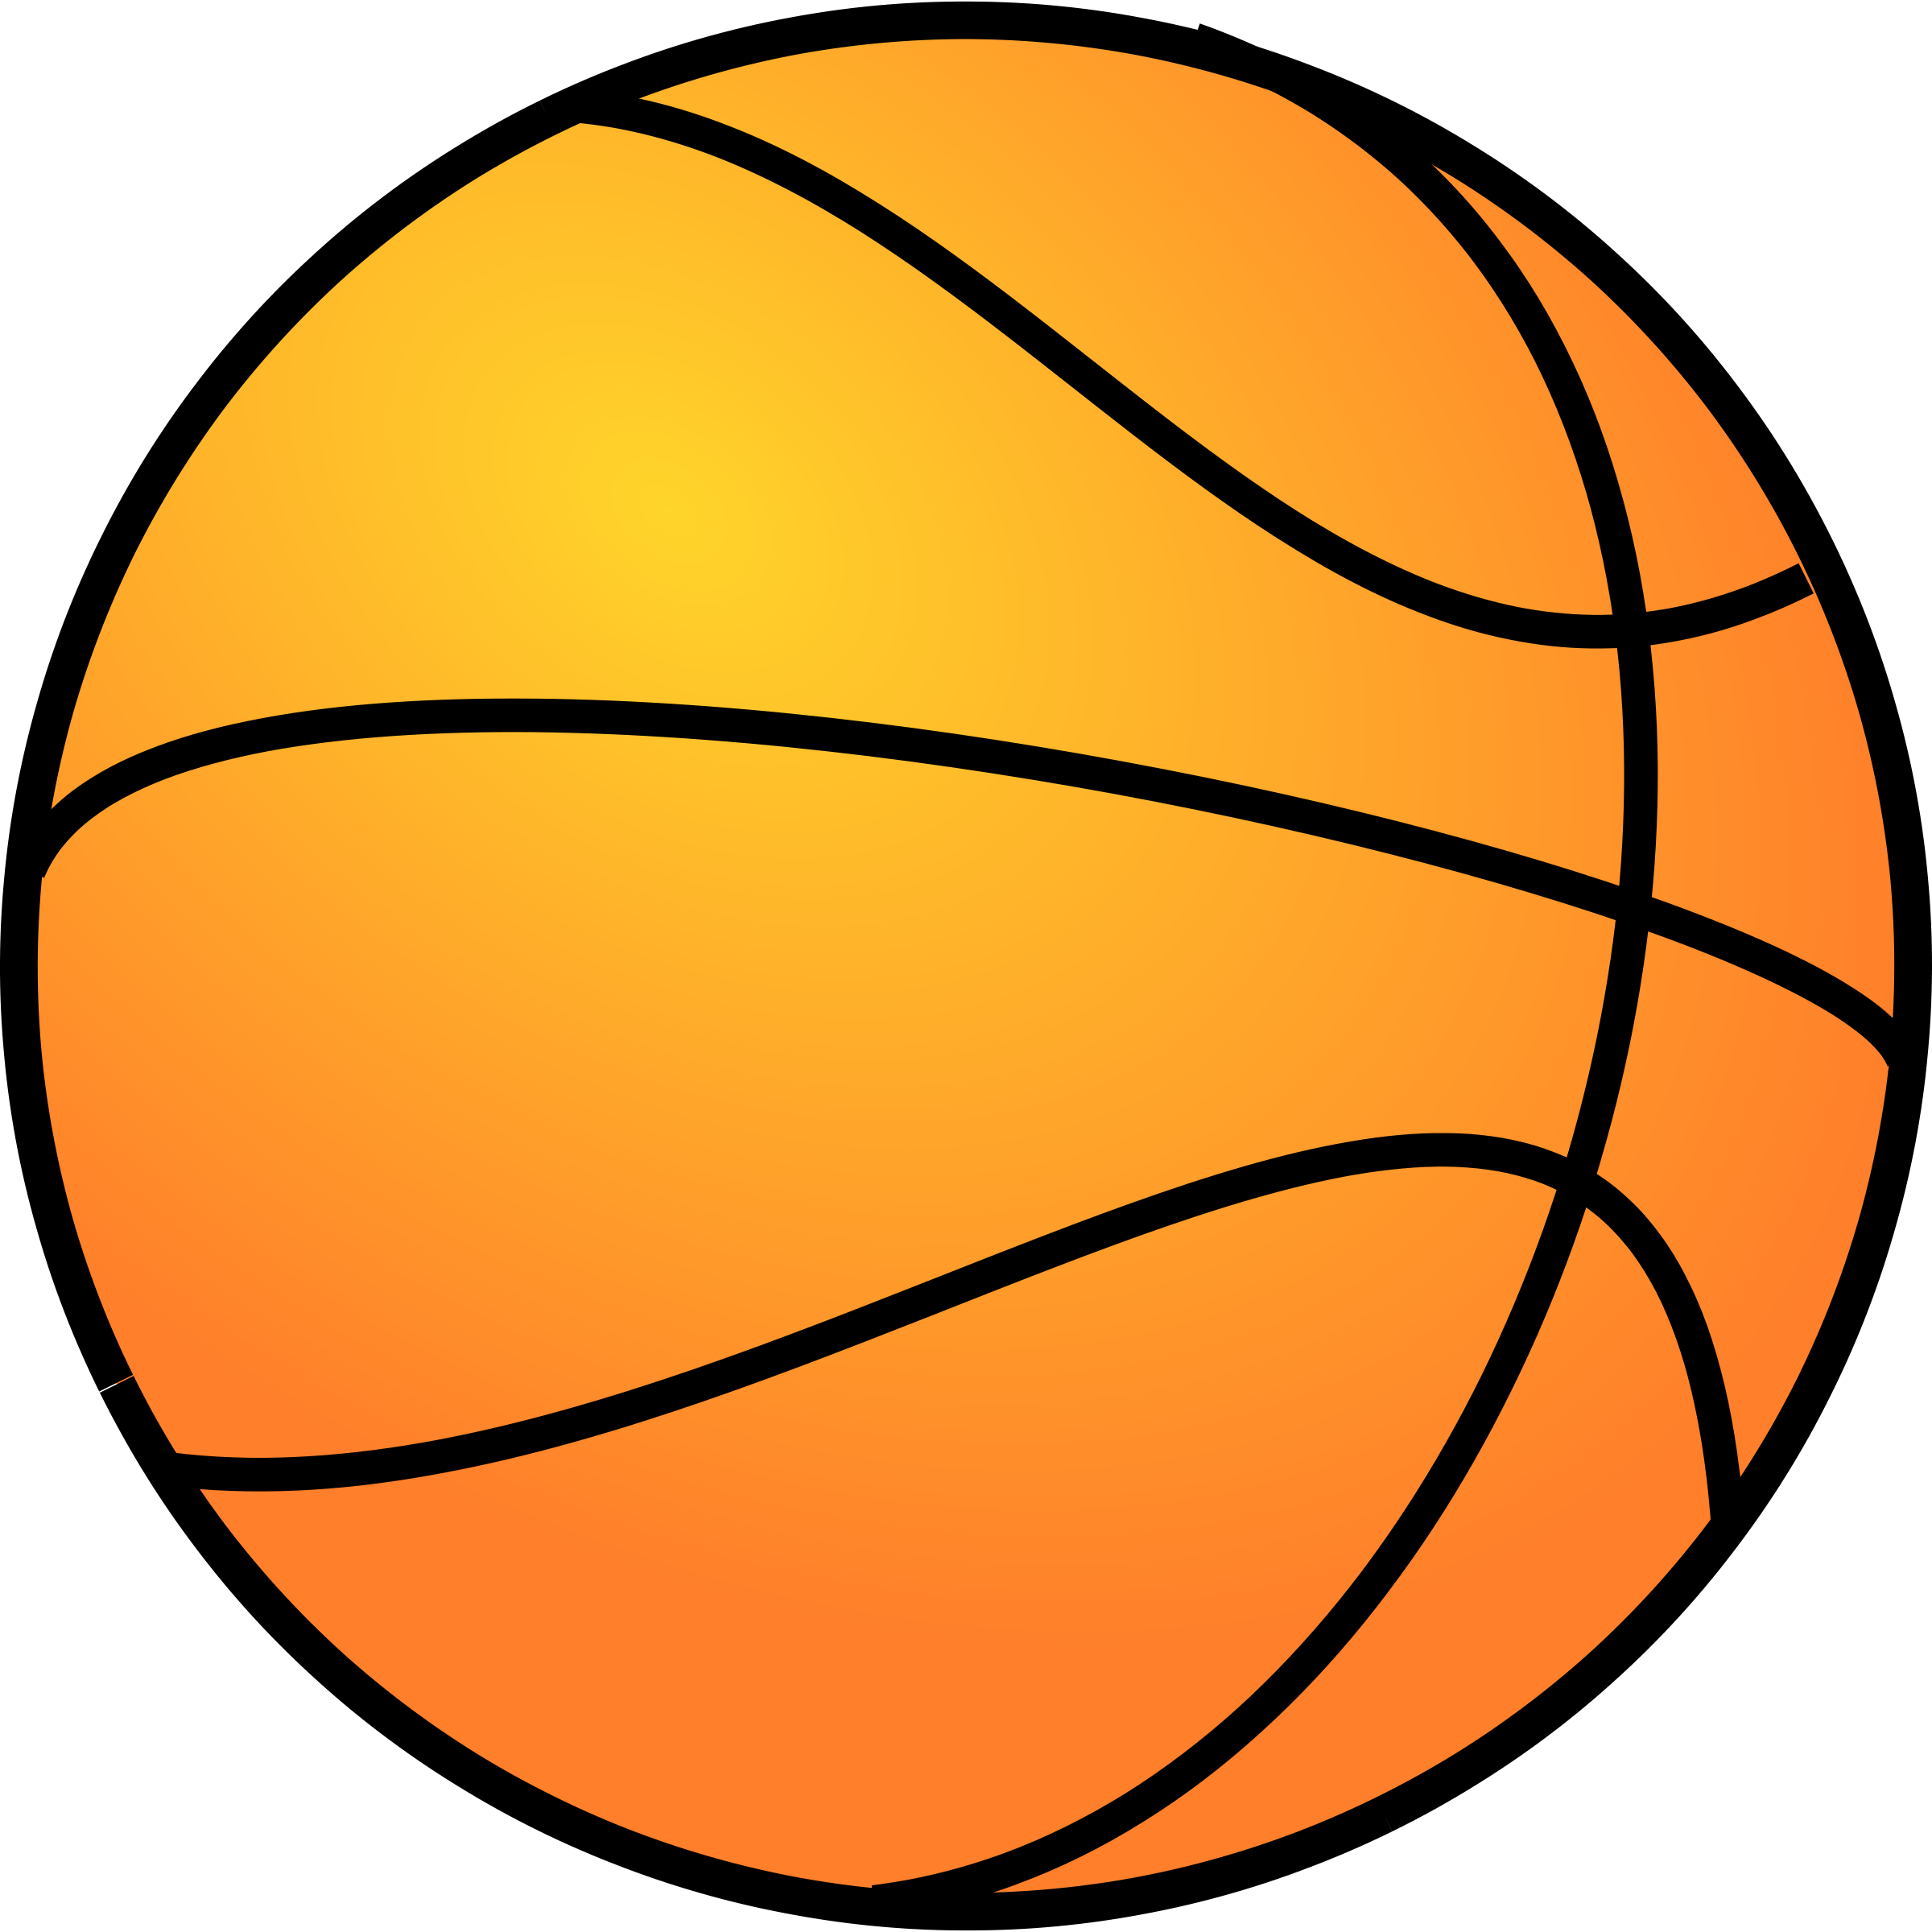 Basketball clipart free images 